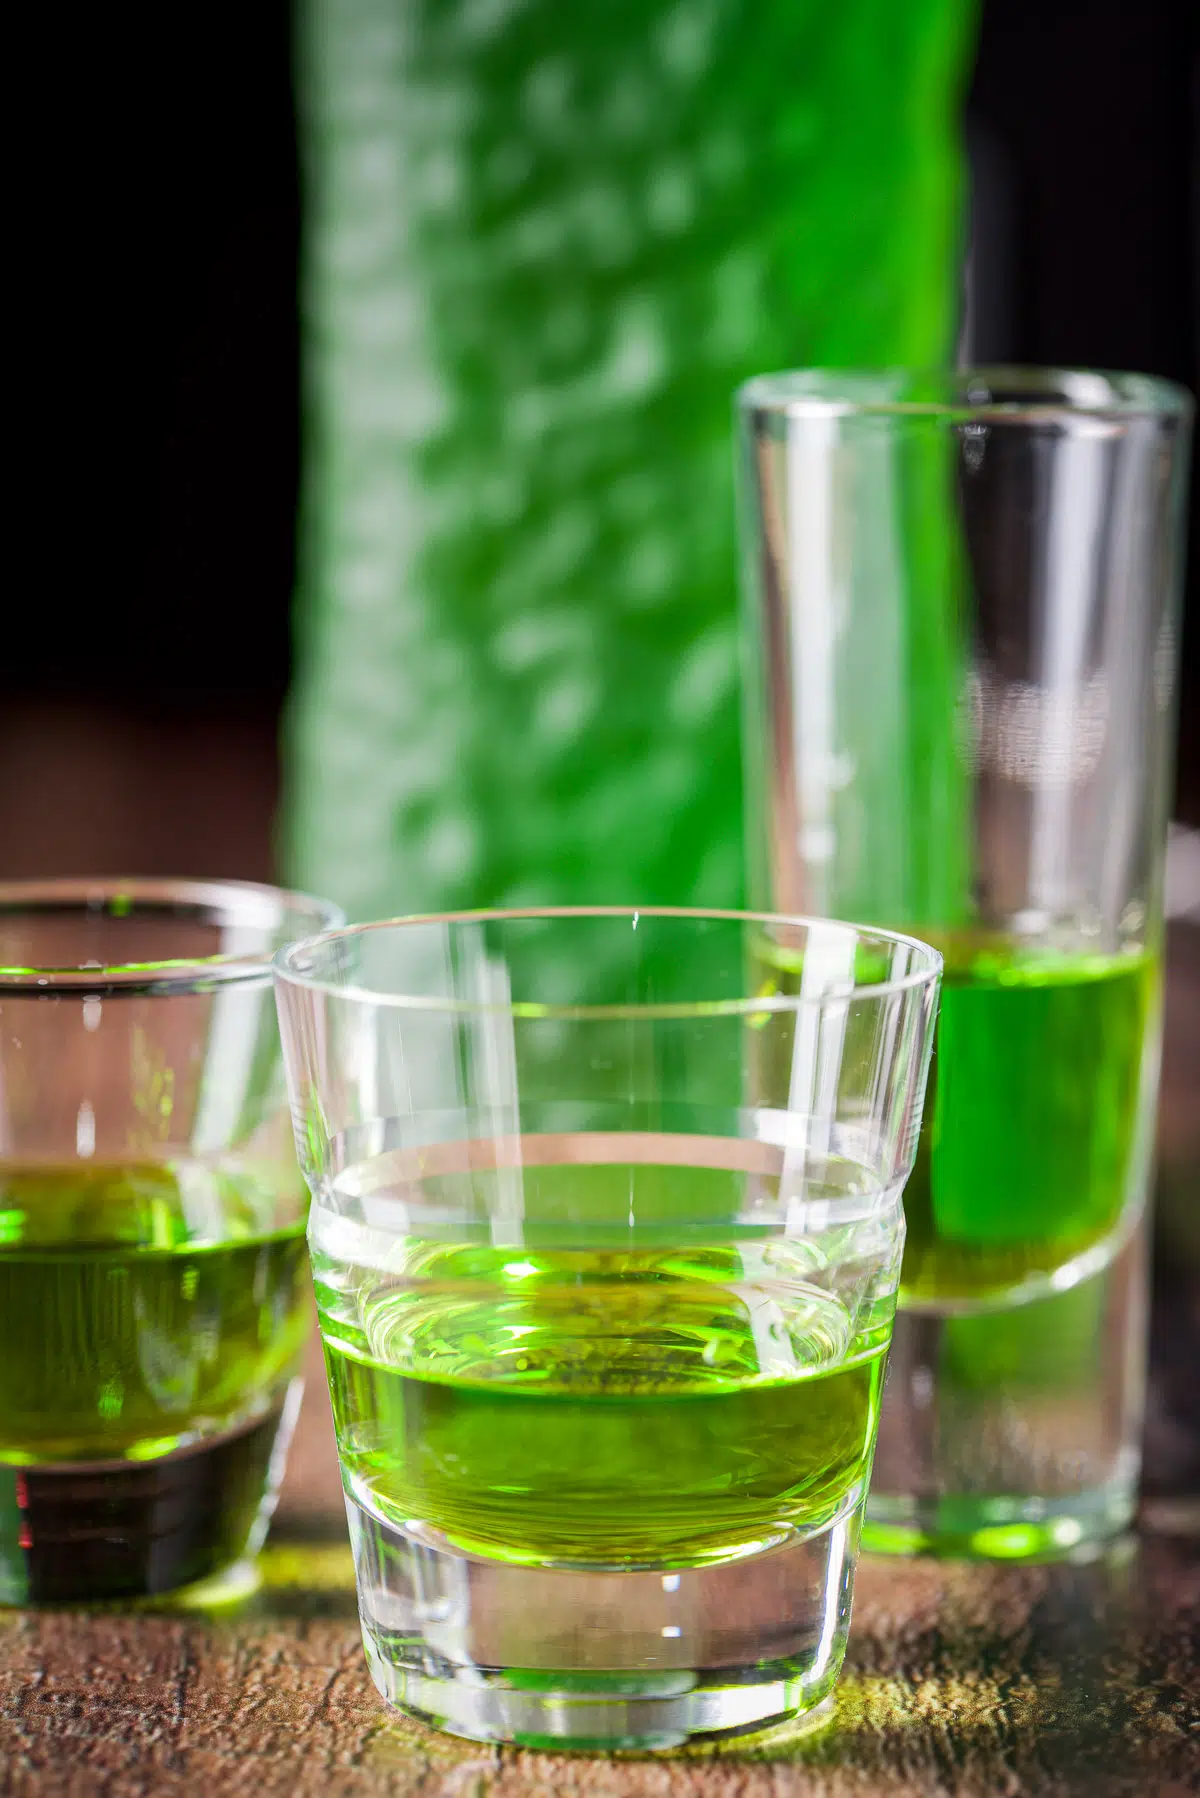 Midori poured into three glasses with the bottle in the back